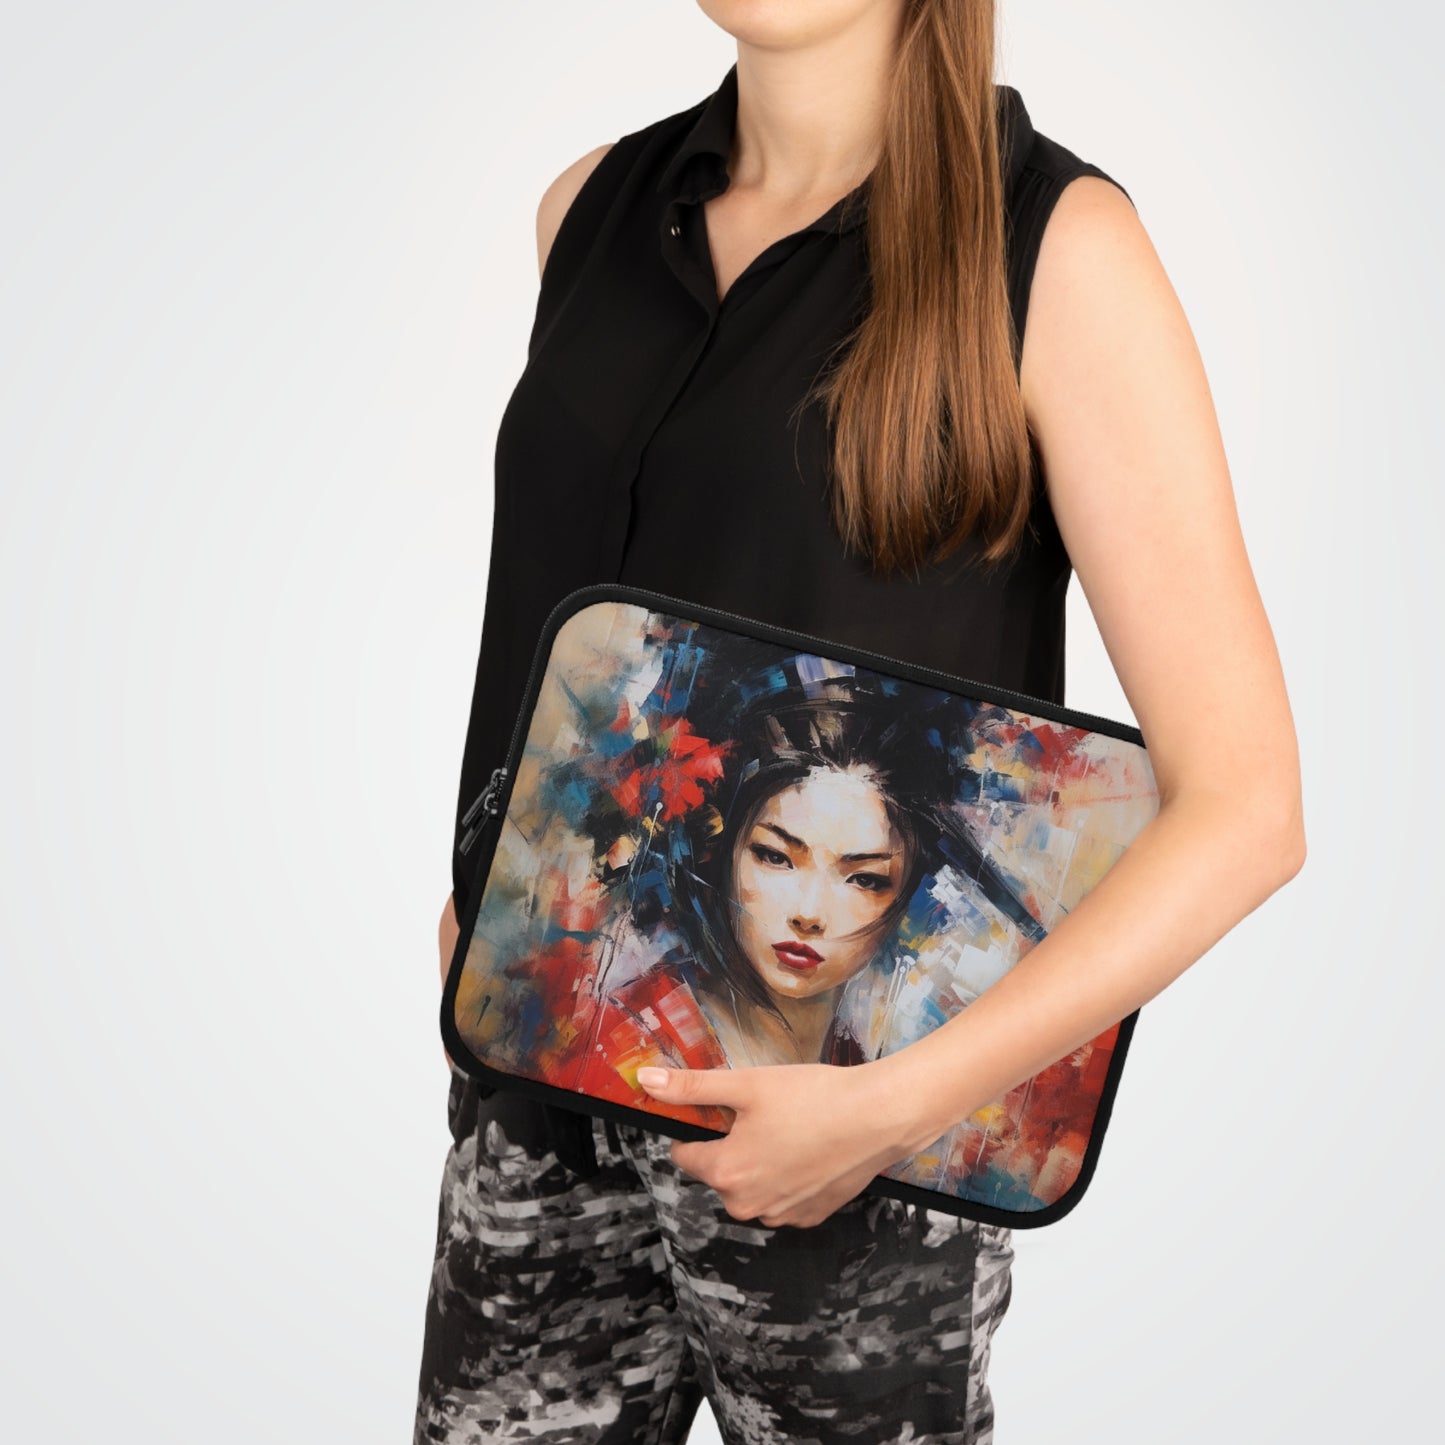 Abstract Geisha Art Laptop Sleeve: Captivating Brushstrokes in a Japanese Aesthetic